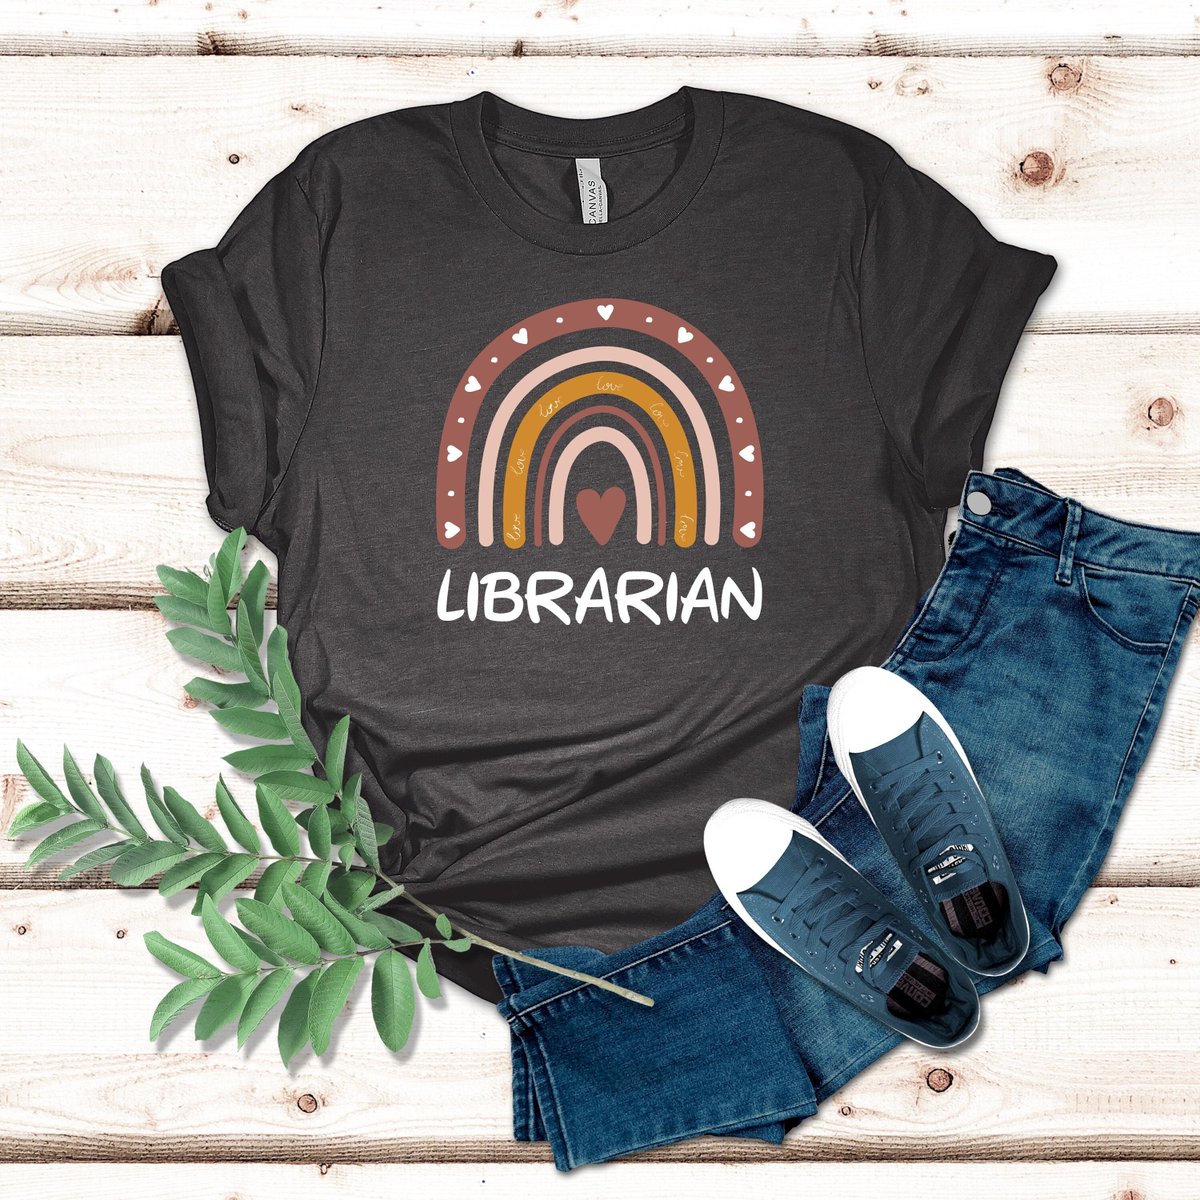 Excited to share the latest addition to my #etsy shop: Librarian Shirt, Librarian T-Shirt, Librarian Rainbow Shirt, Reading Shirt, Gift for Librarian Teacher, Librarian Gifts, Back To School etsy.me/3AseJMP #shortsleeve #crew #librarianshirt #booklovershirt #bo